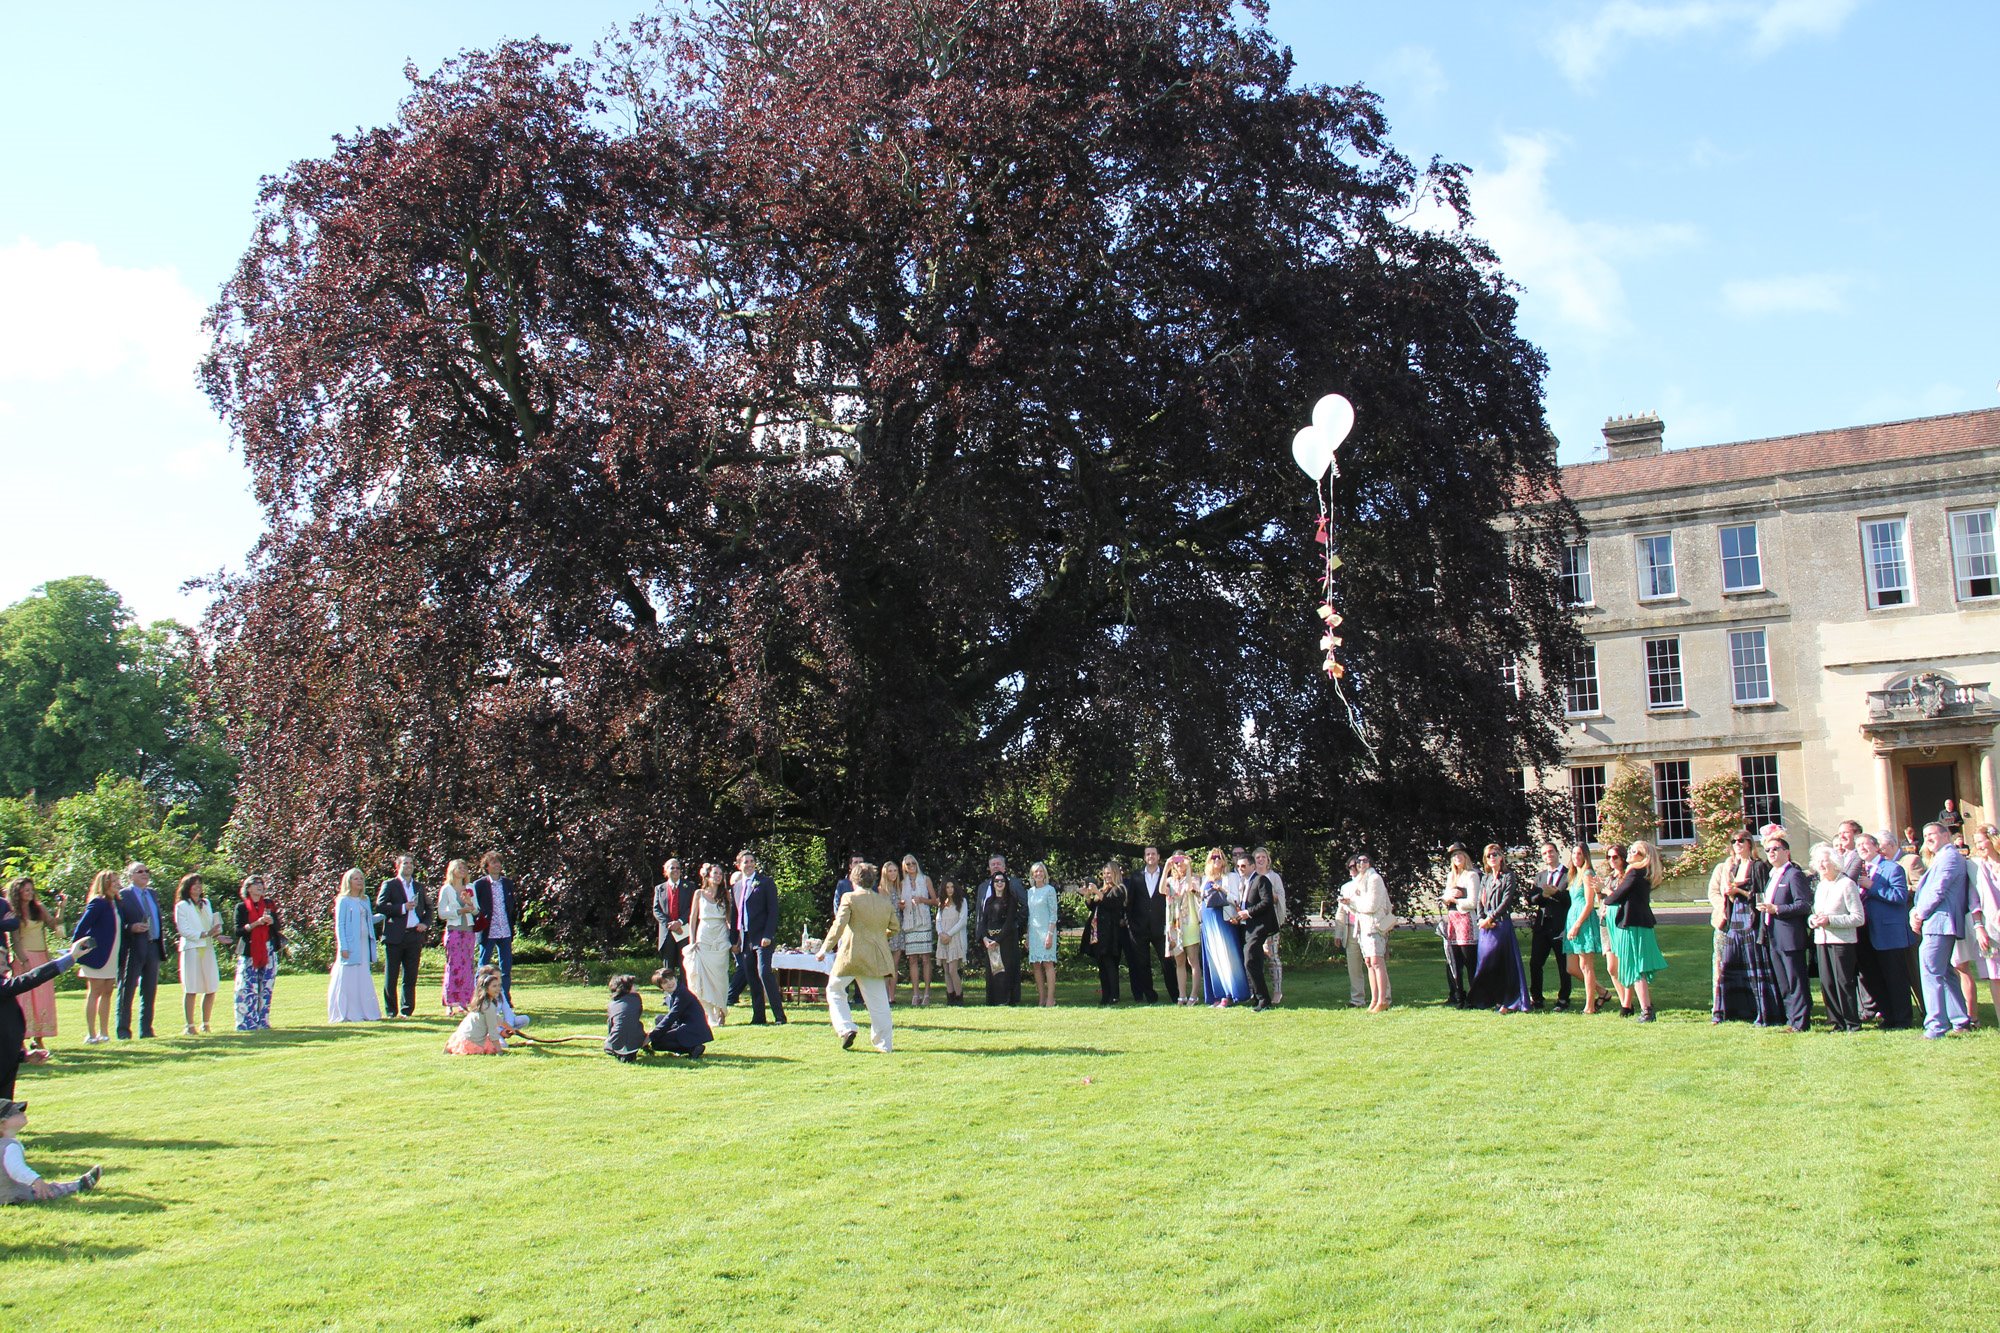 Outdoor festival wedding ceremony on the lawn of elmore court in gloucestershire